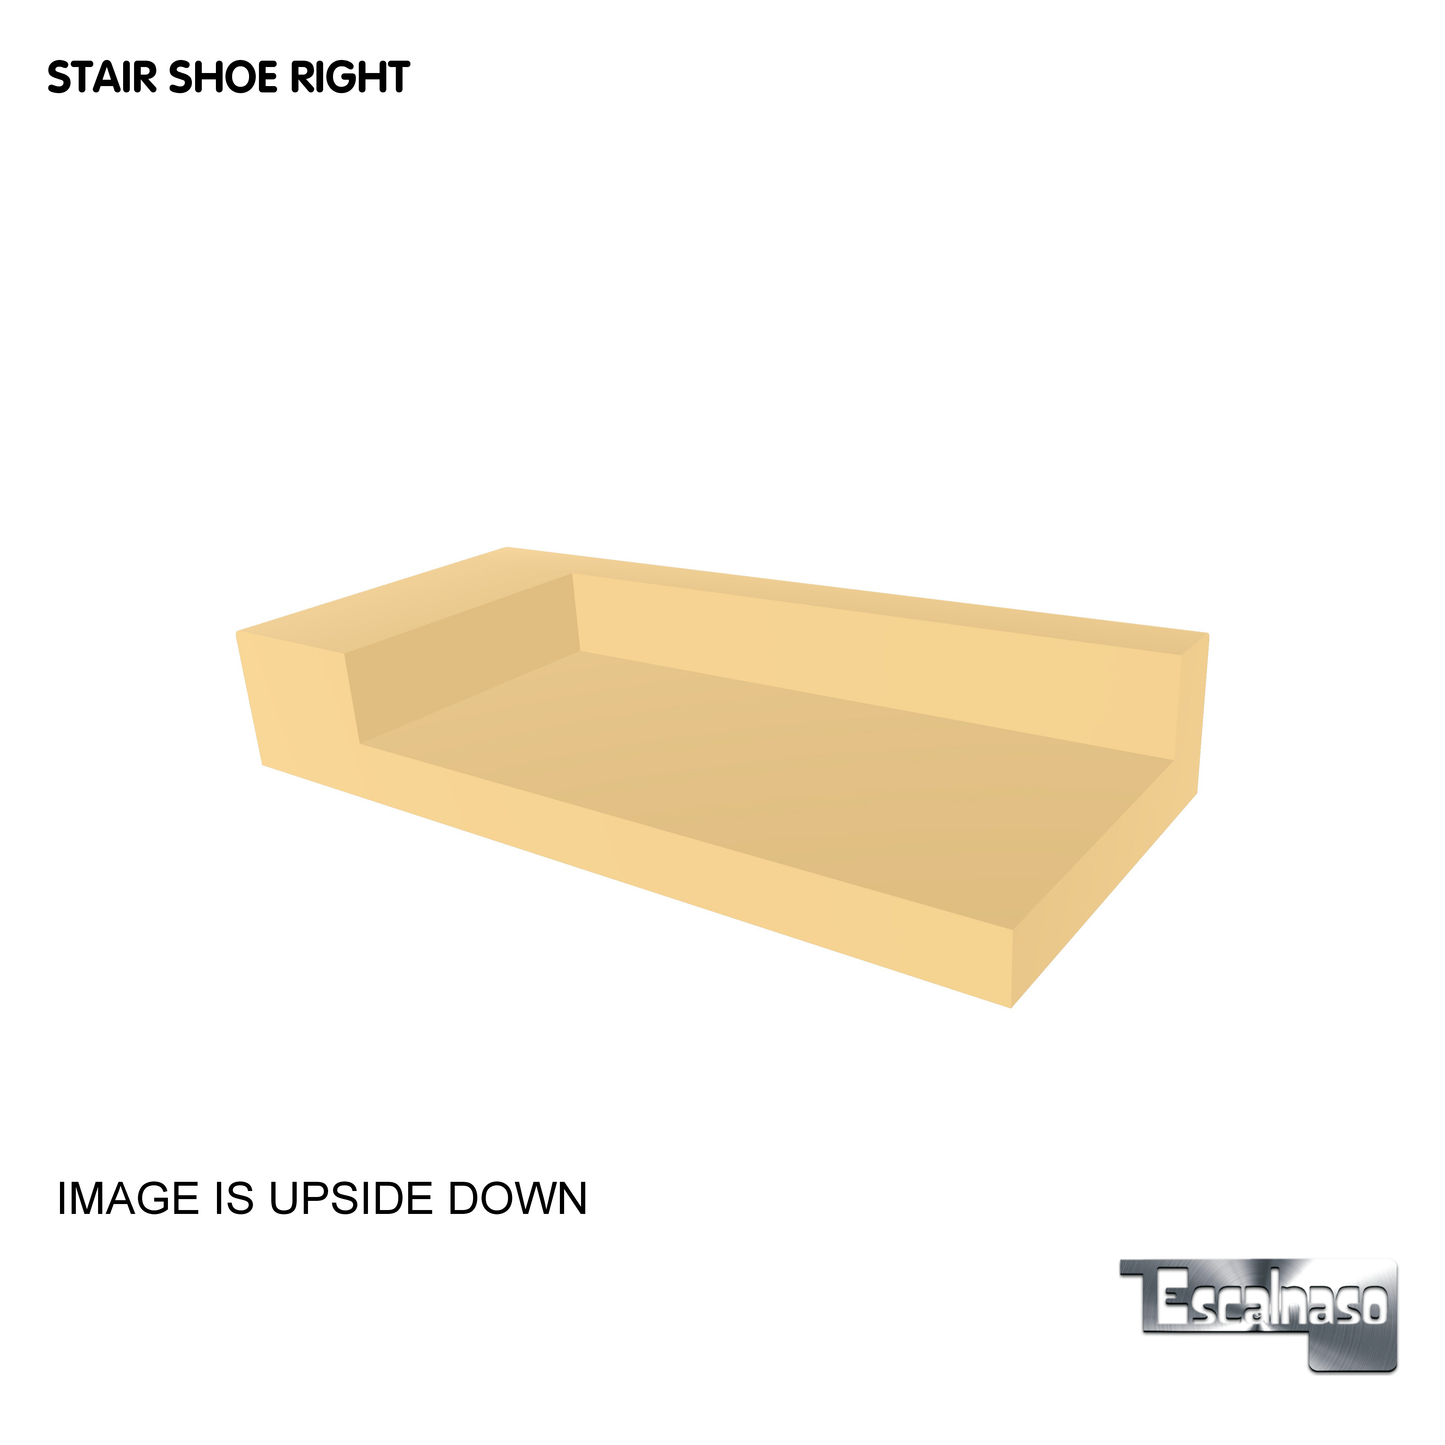 (18111) LARGE STAIR SHOE RIGHT